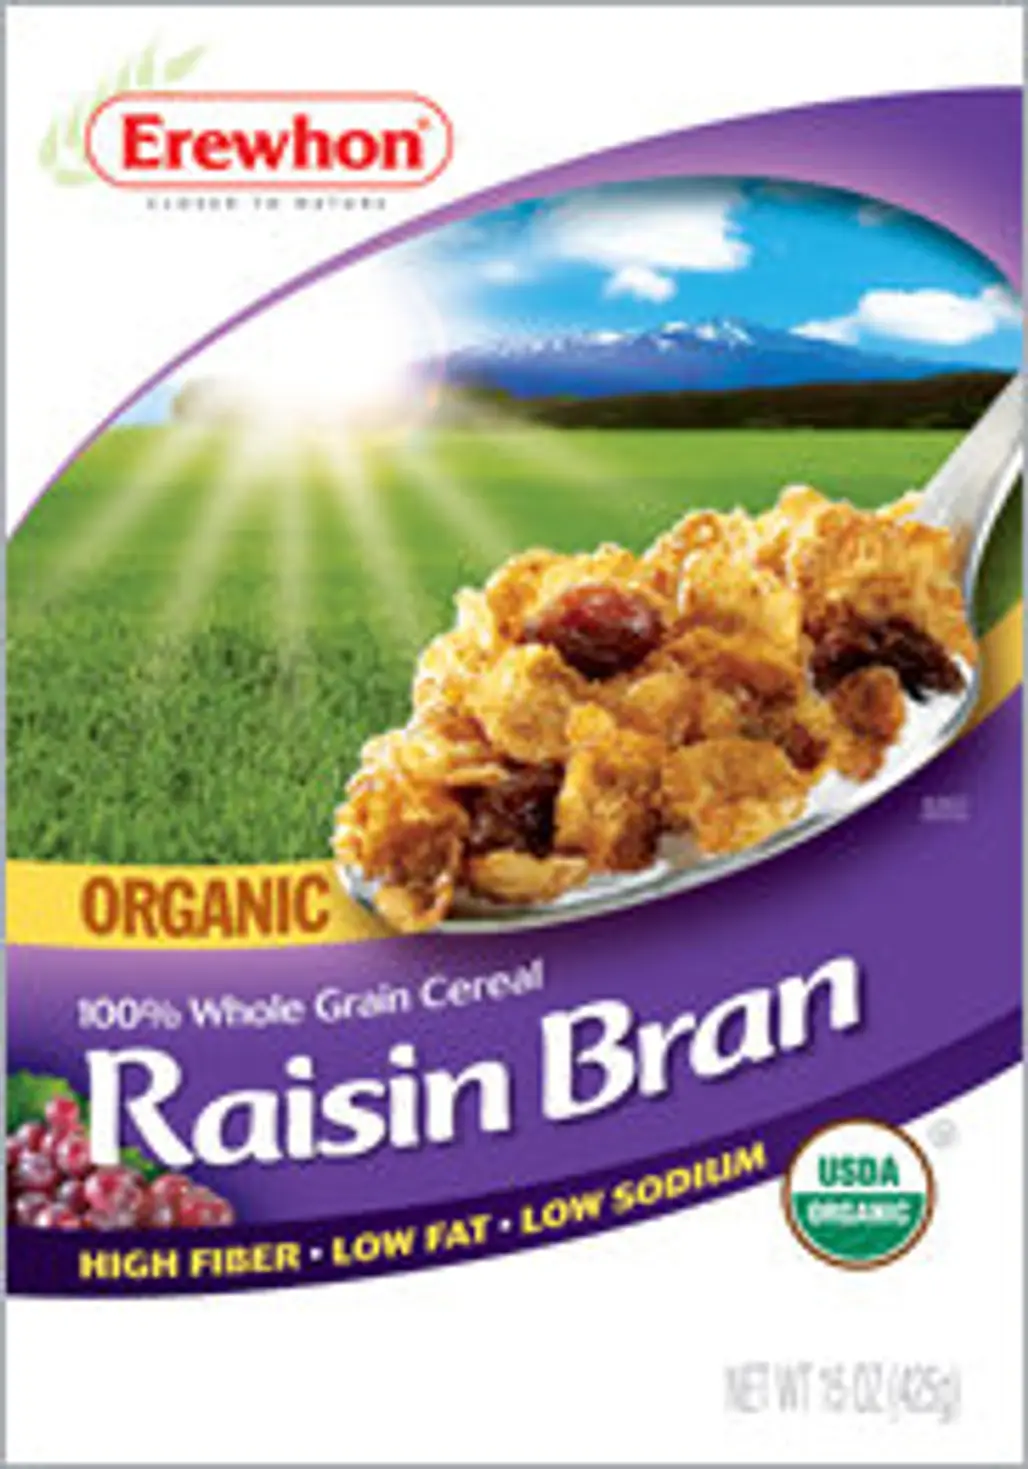 The USDA Organic Stamp on the Box Does Not Always Mean It's a 100% Organic, Preservatives-free Product